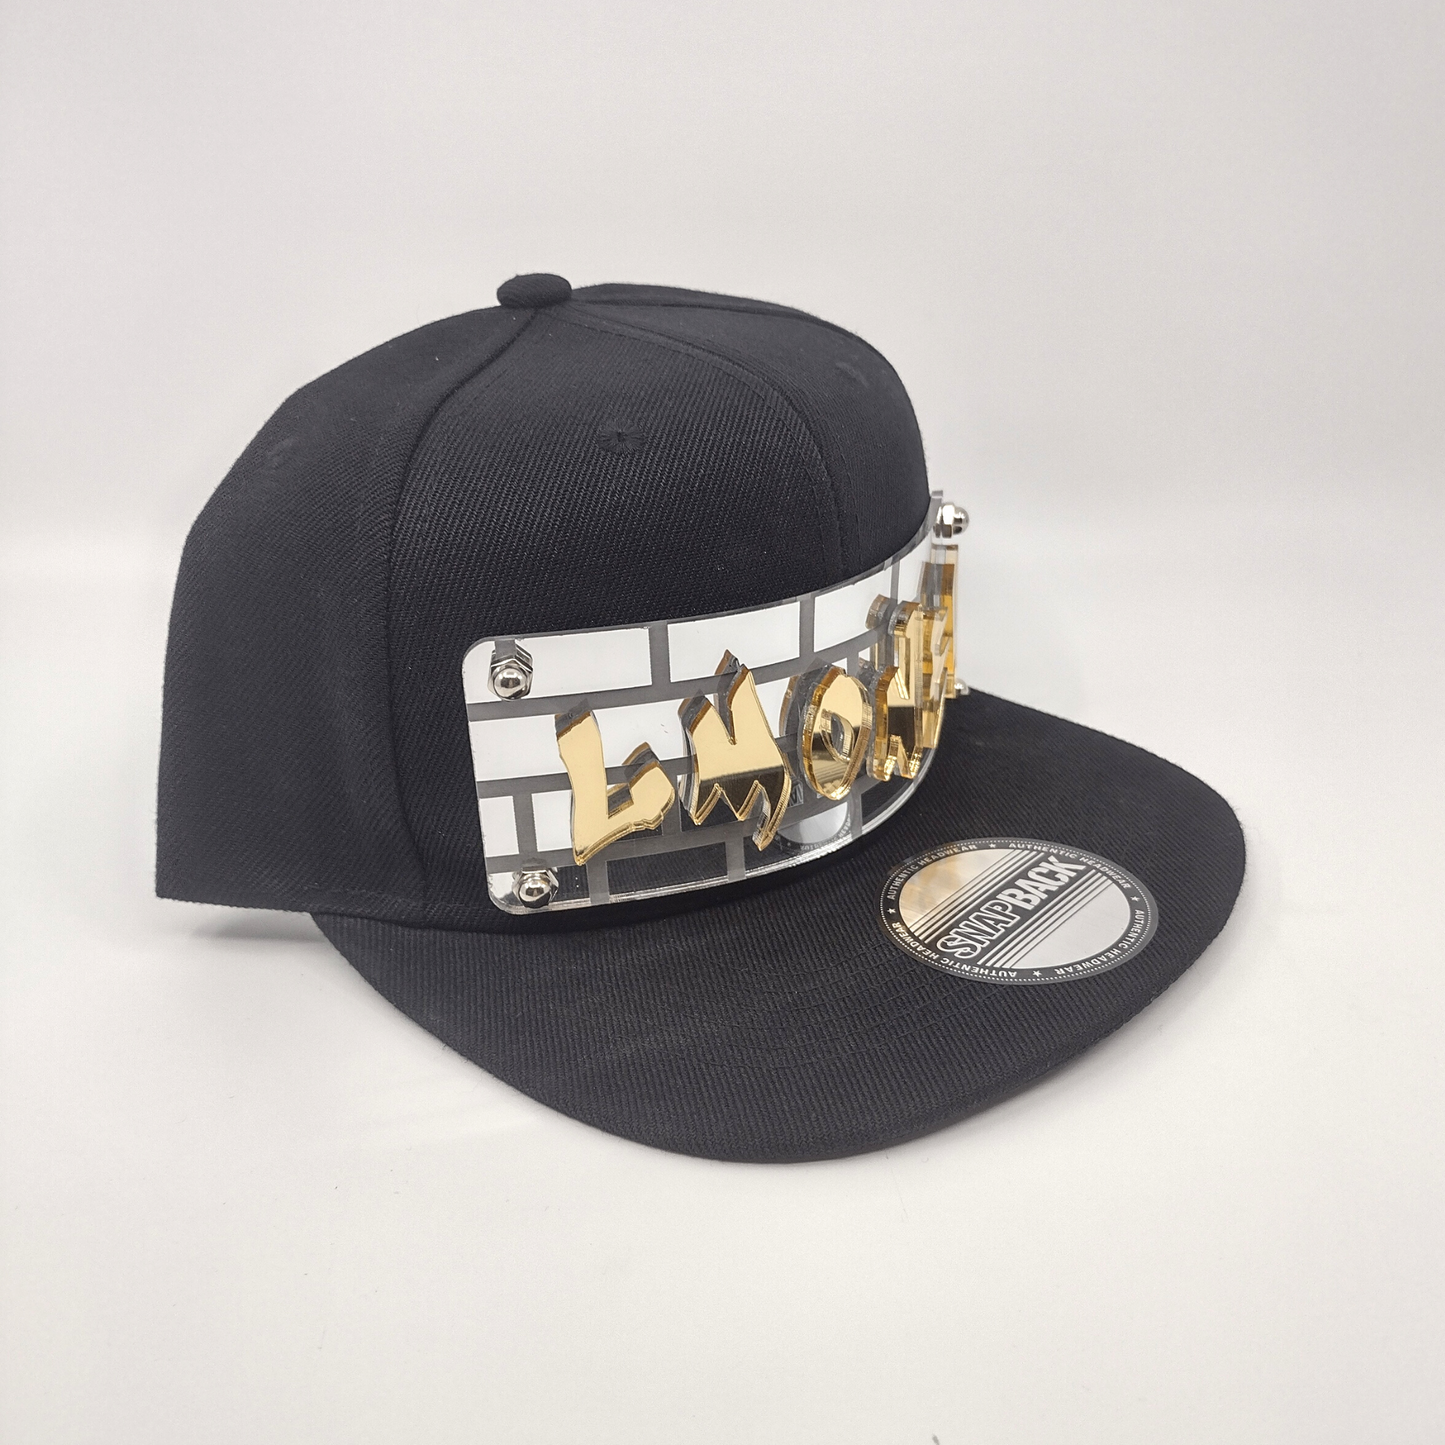 Black Custom Snapback Hat, Laser Cut, Made to Order, Exclusive Creation